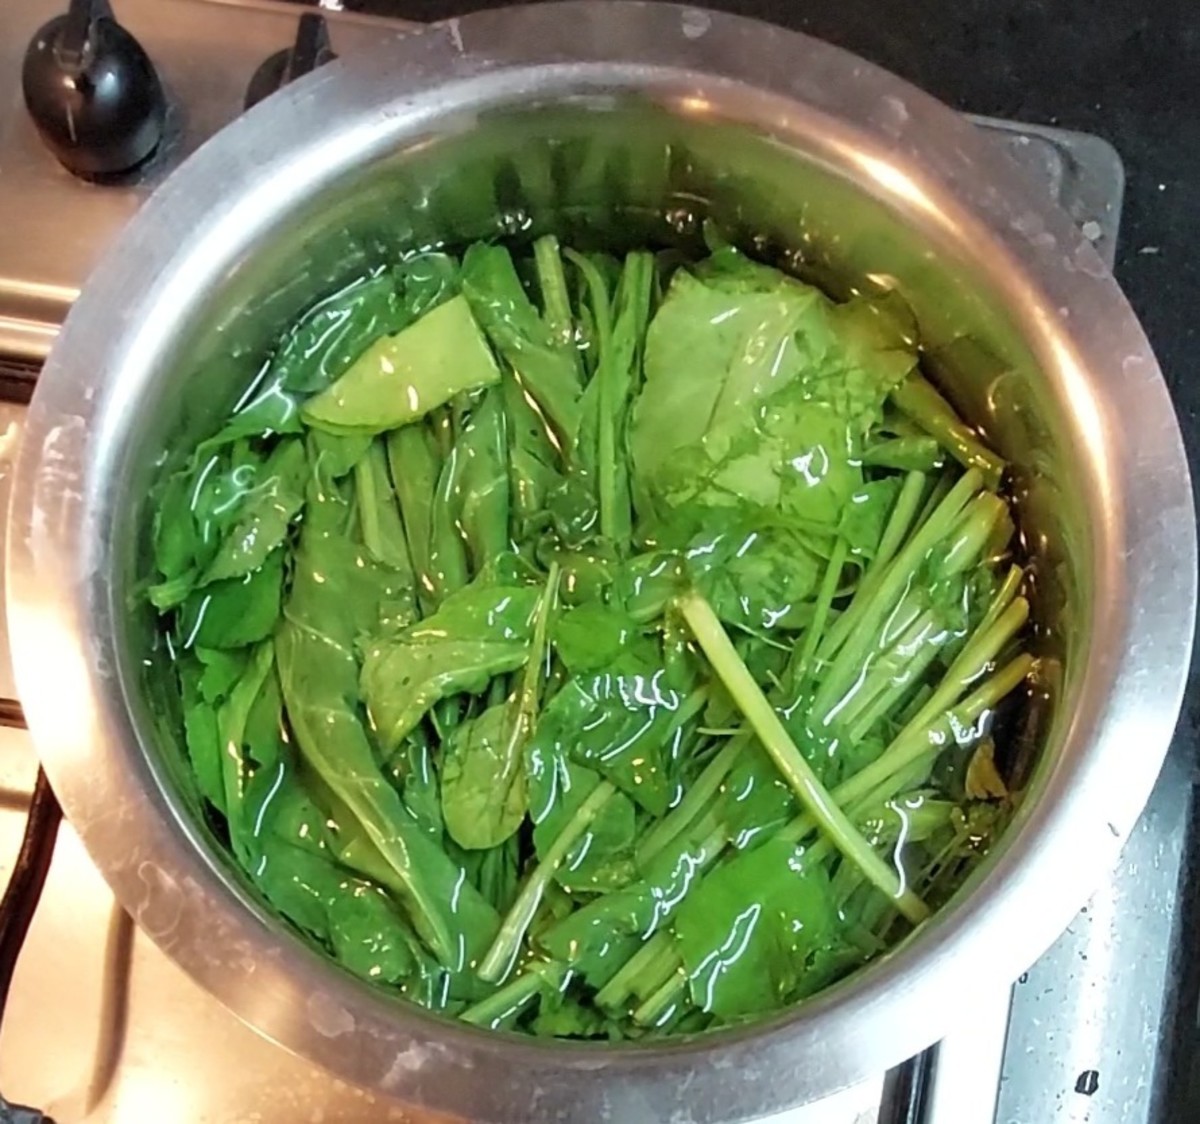 In a vessel, boil 4 cups of water. Add 2 cups of tender palak leaves and stems.